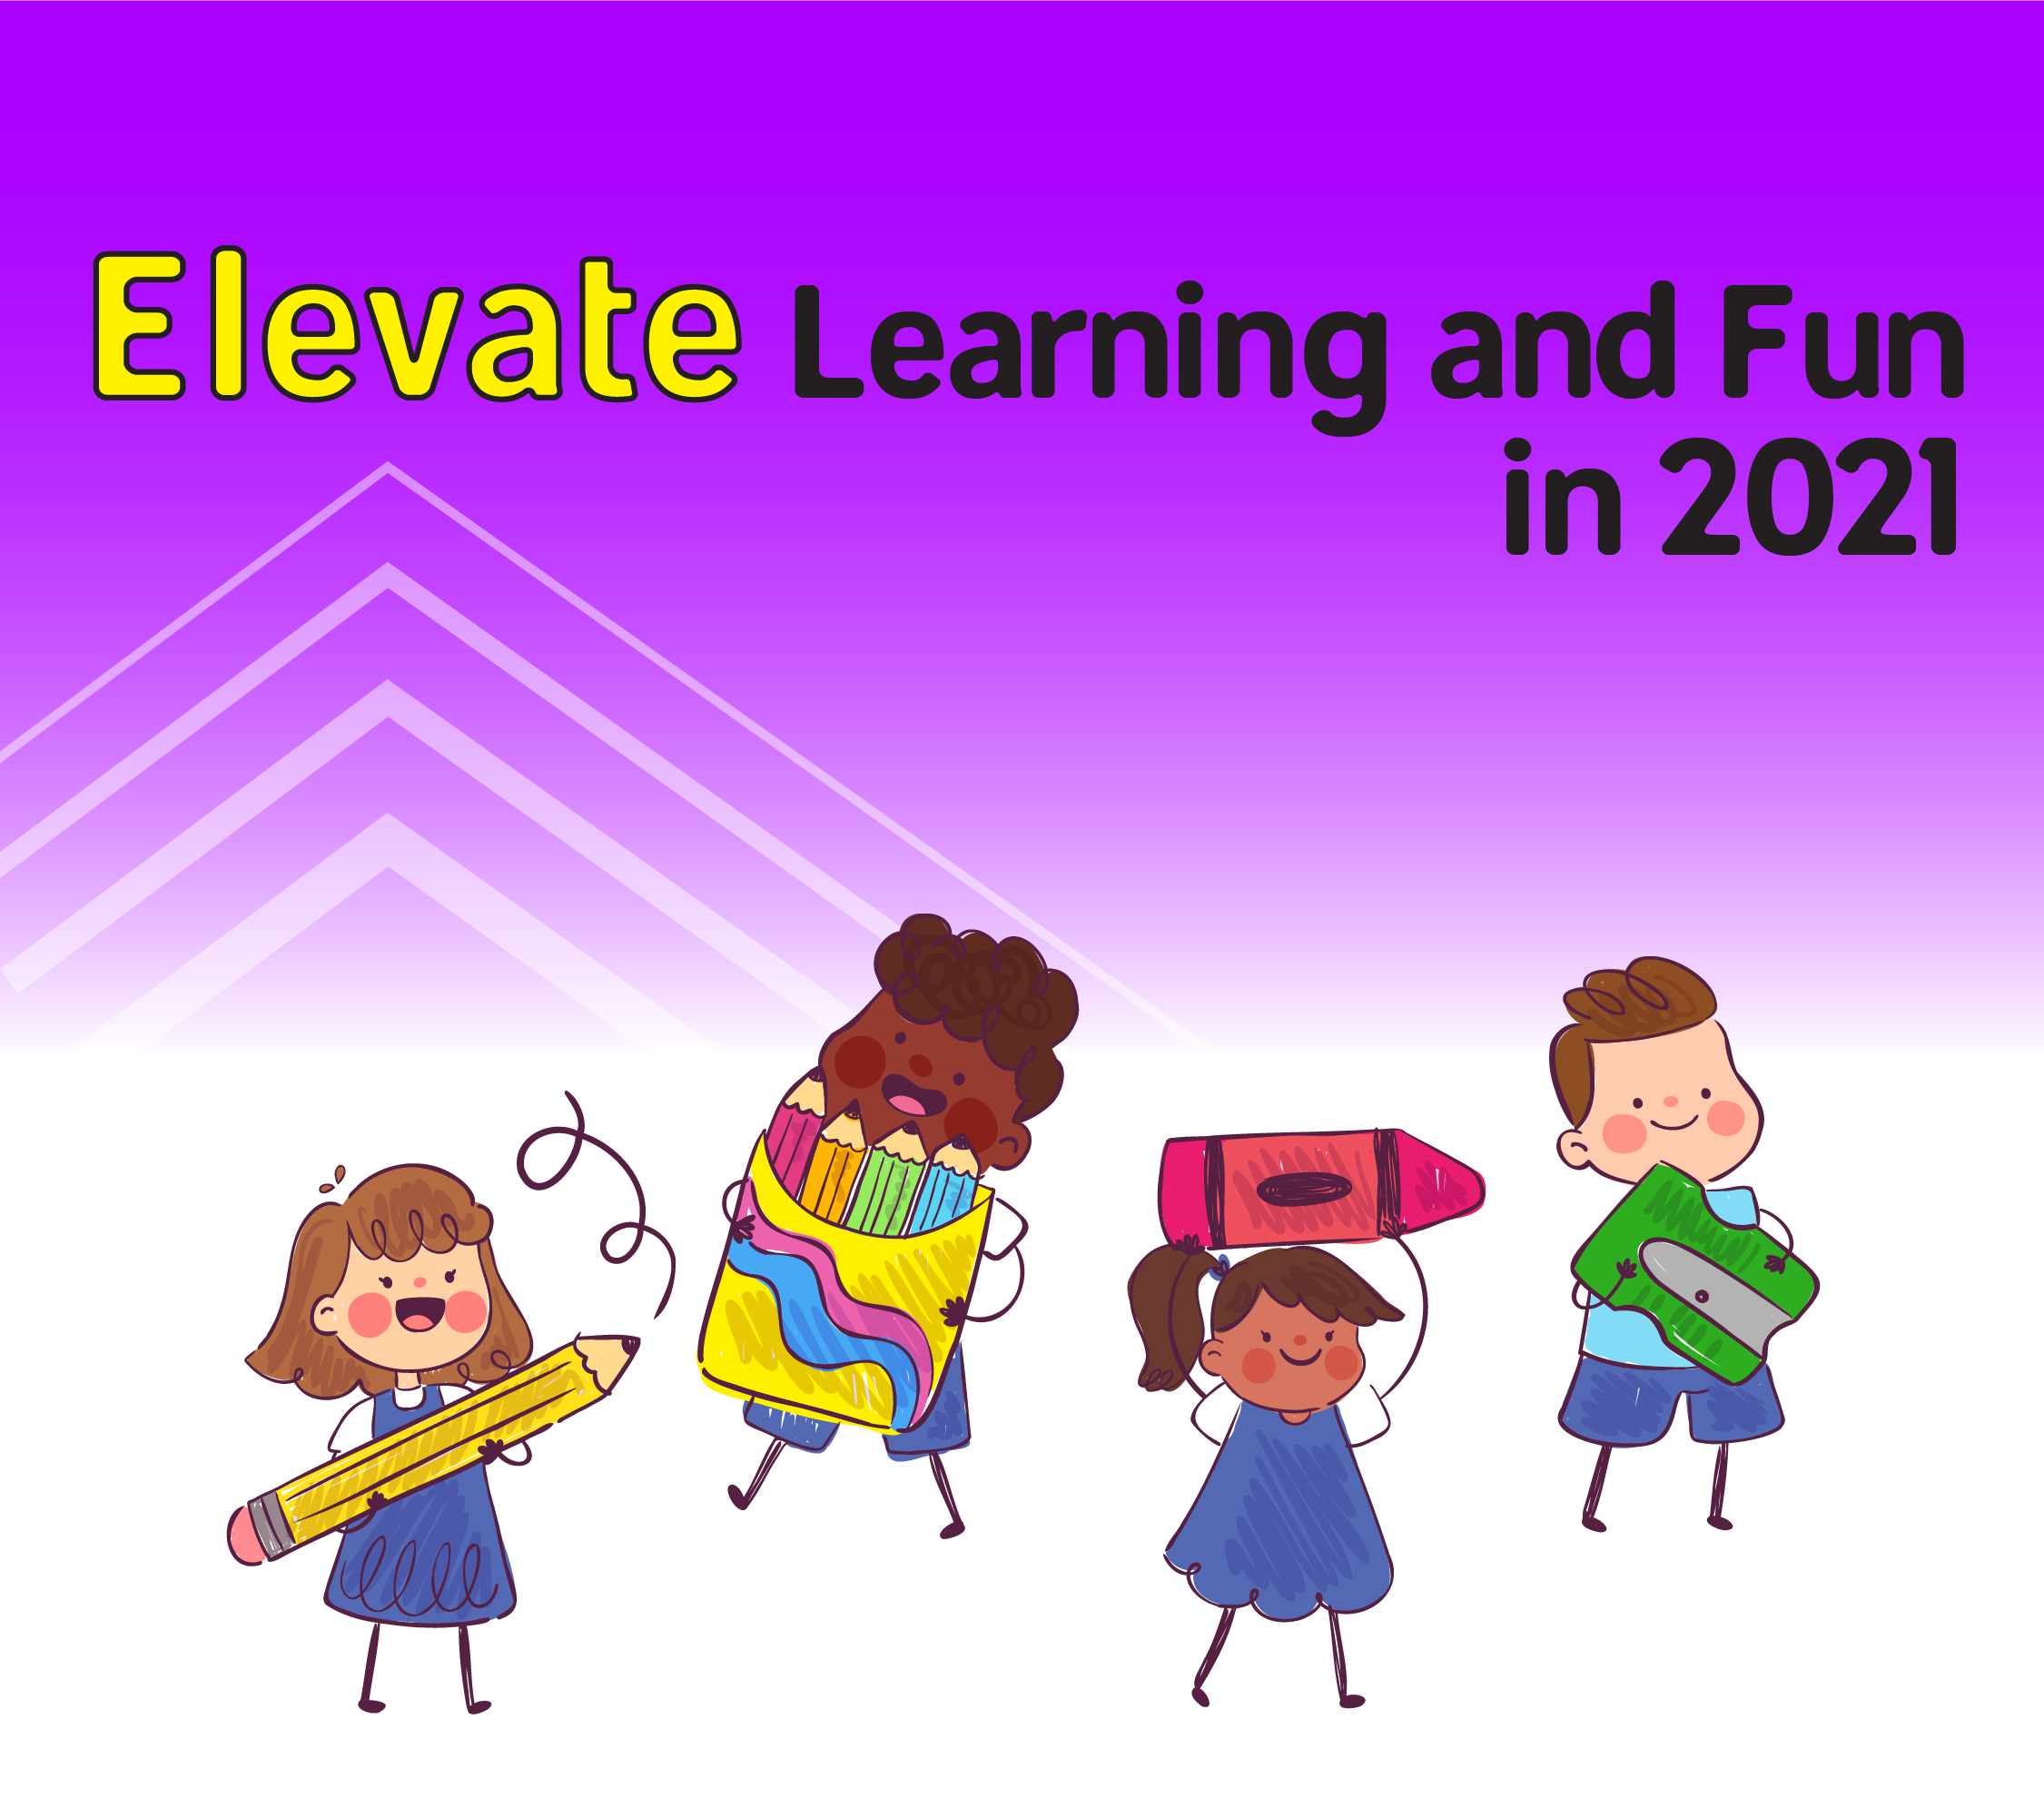 Image for Elevate Learning and Fun in 2021